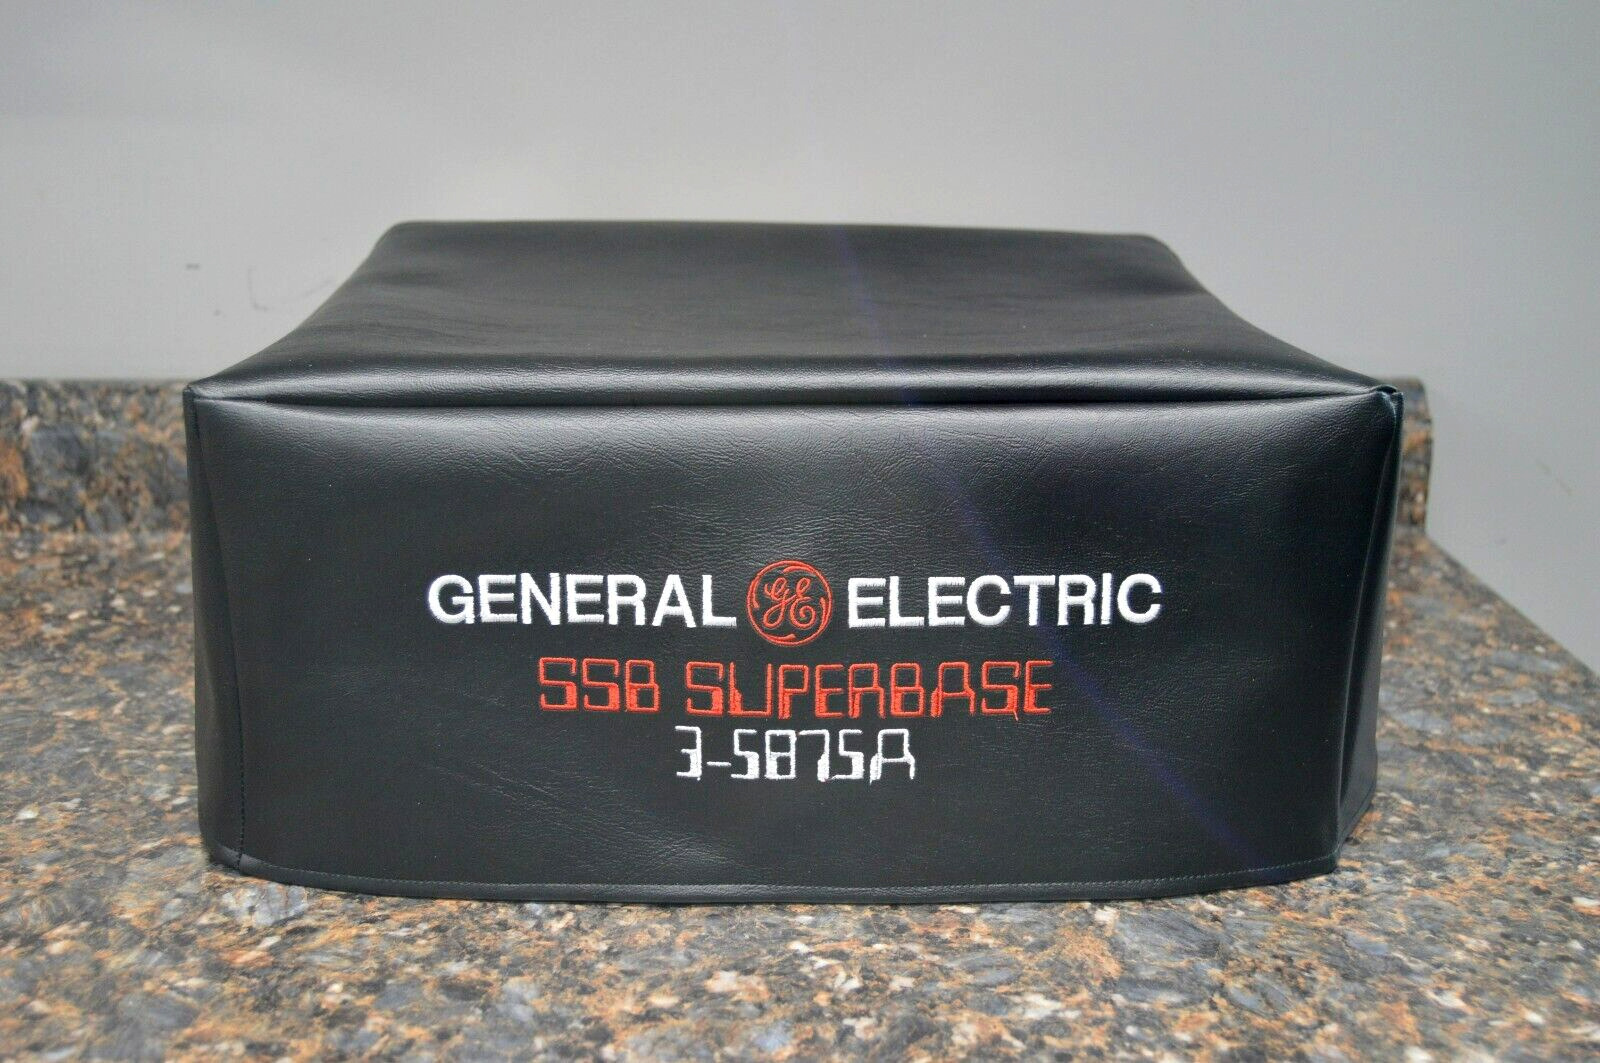 GE Superbase 3-5875A Signature Series Radio Dust Cover. Available Now for $29.99